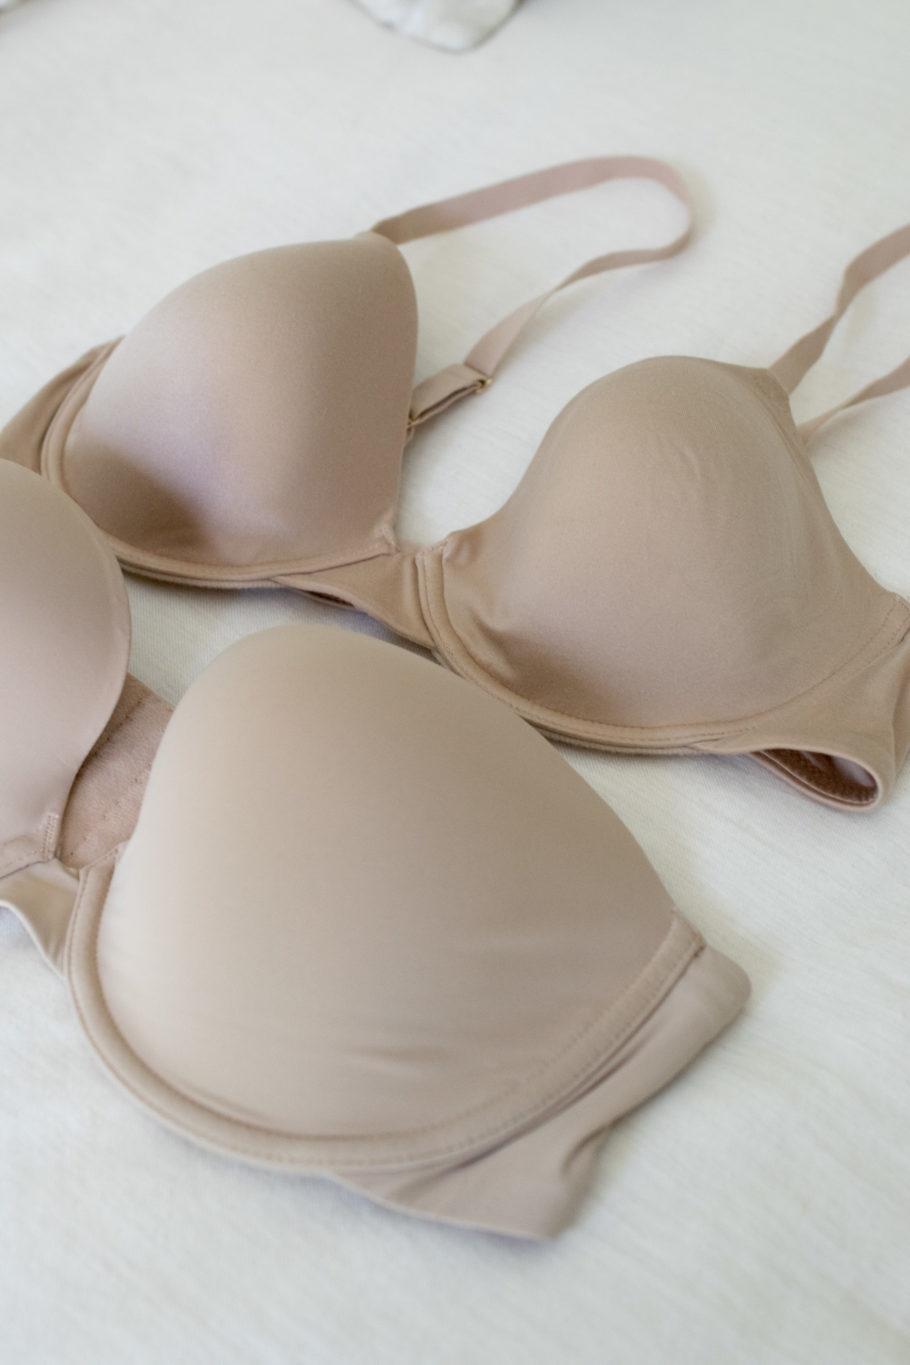 2 New Bras that Hit All the Marks